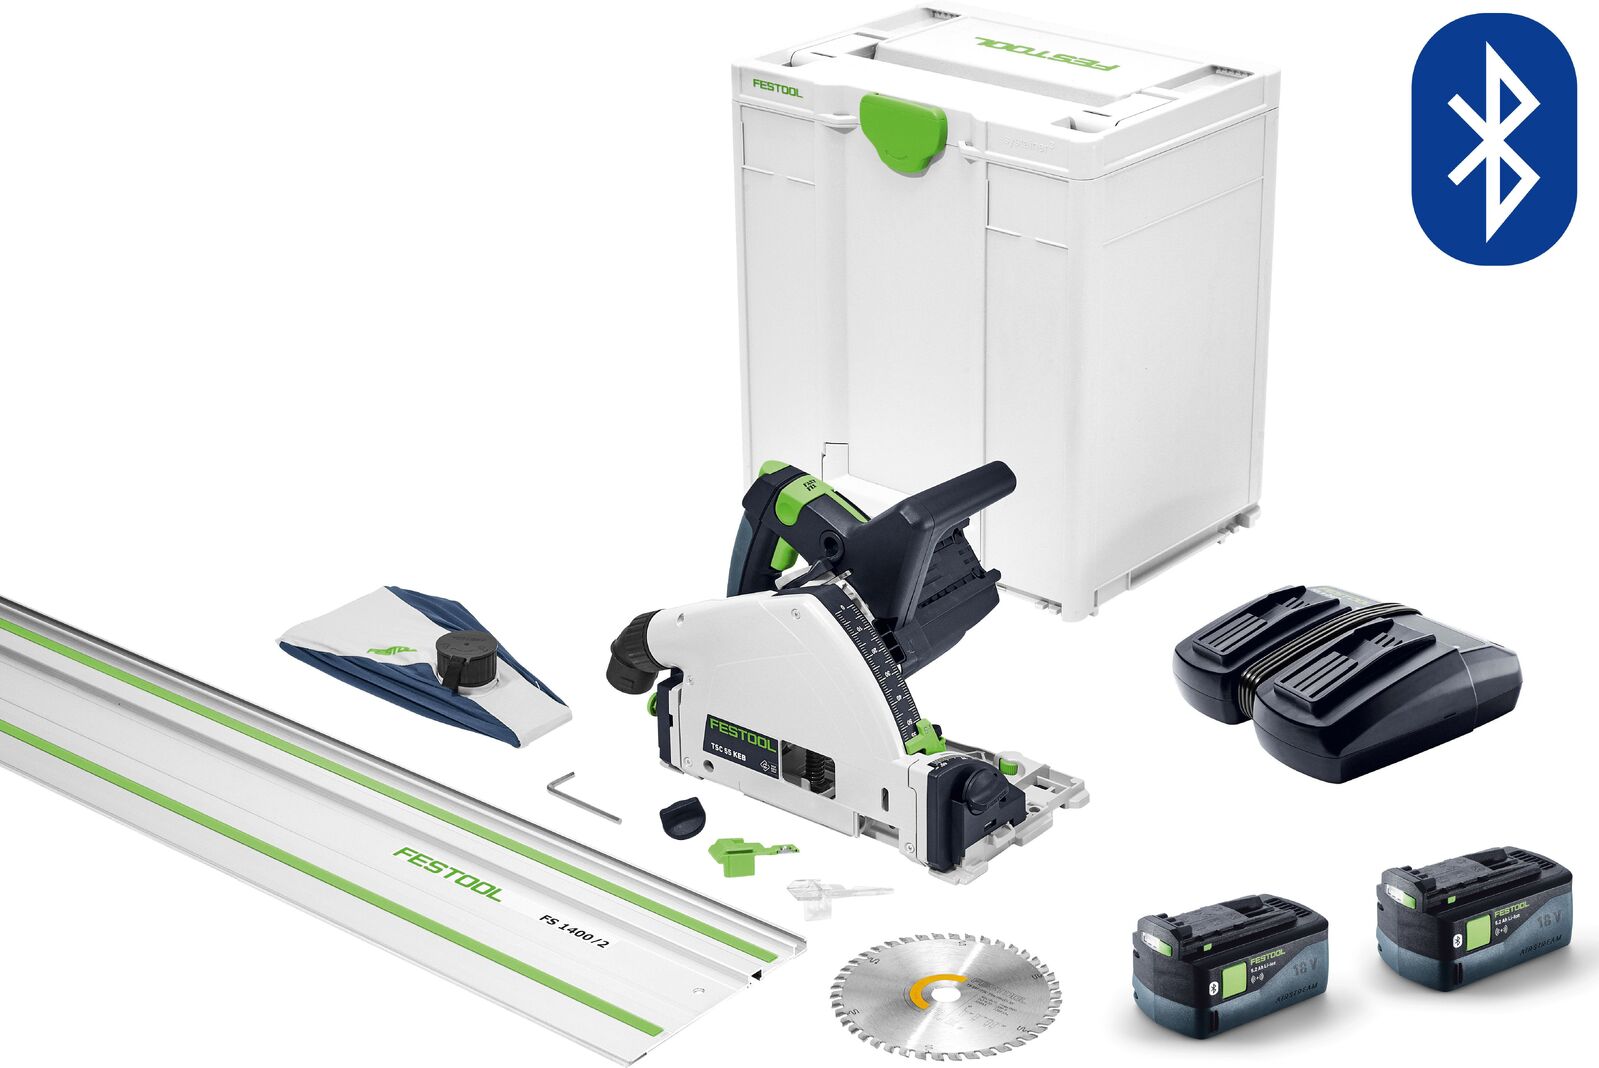 Festool TSC 55K 18V 160mm Cordless Plunge Saw 5.2Ah XL Set in Systainer with 1400mm Rail (577282)